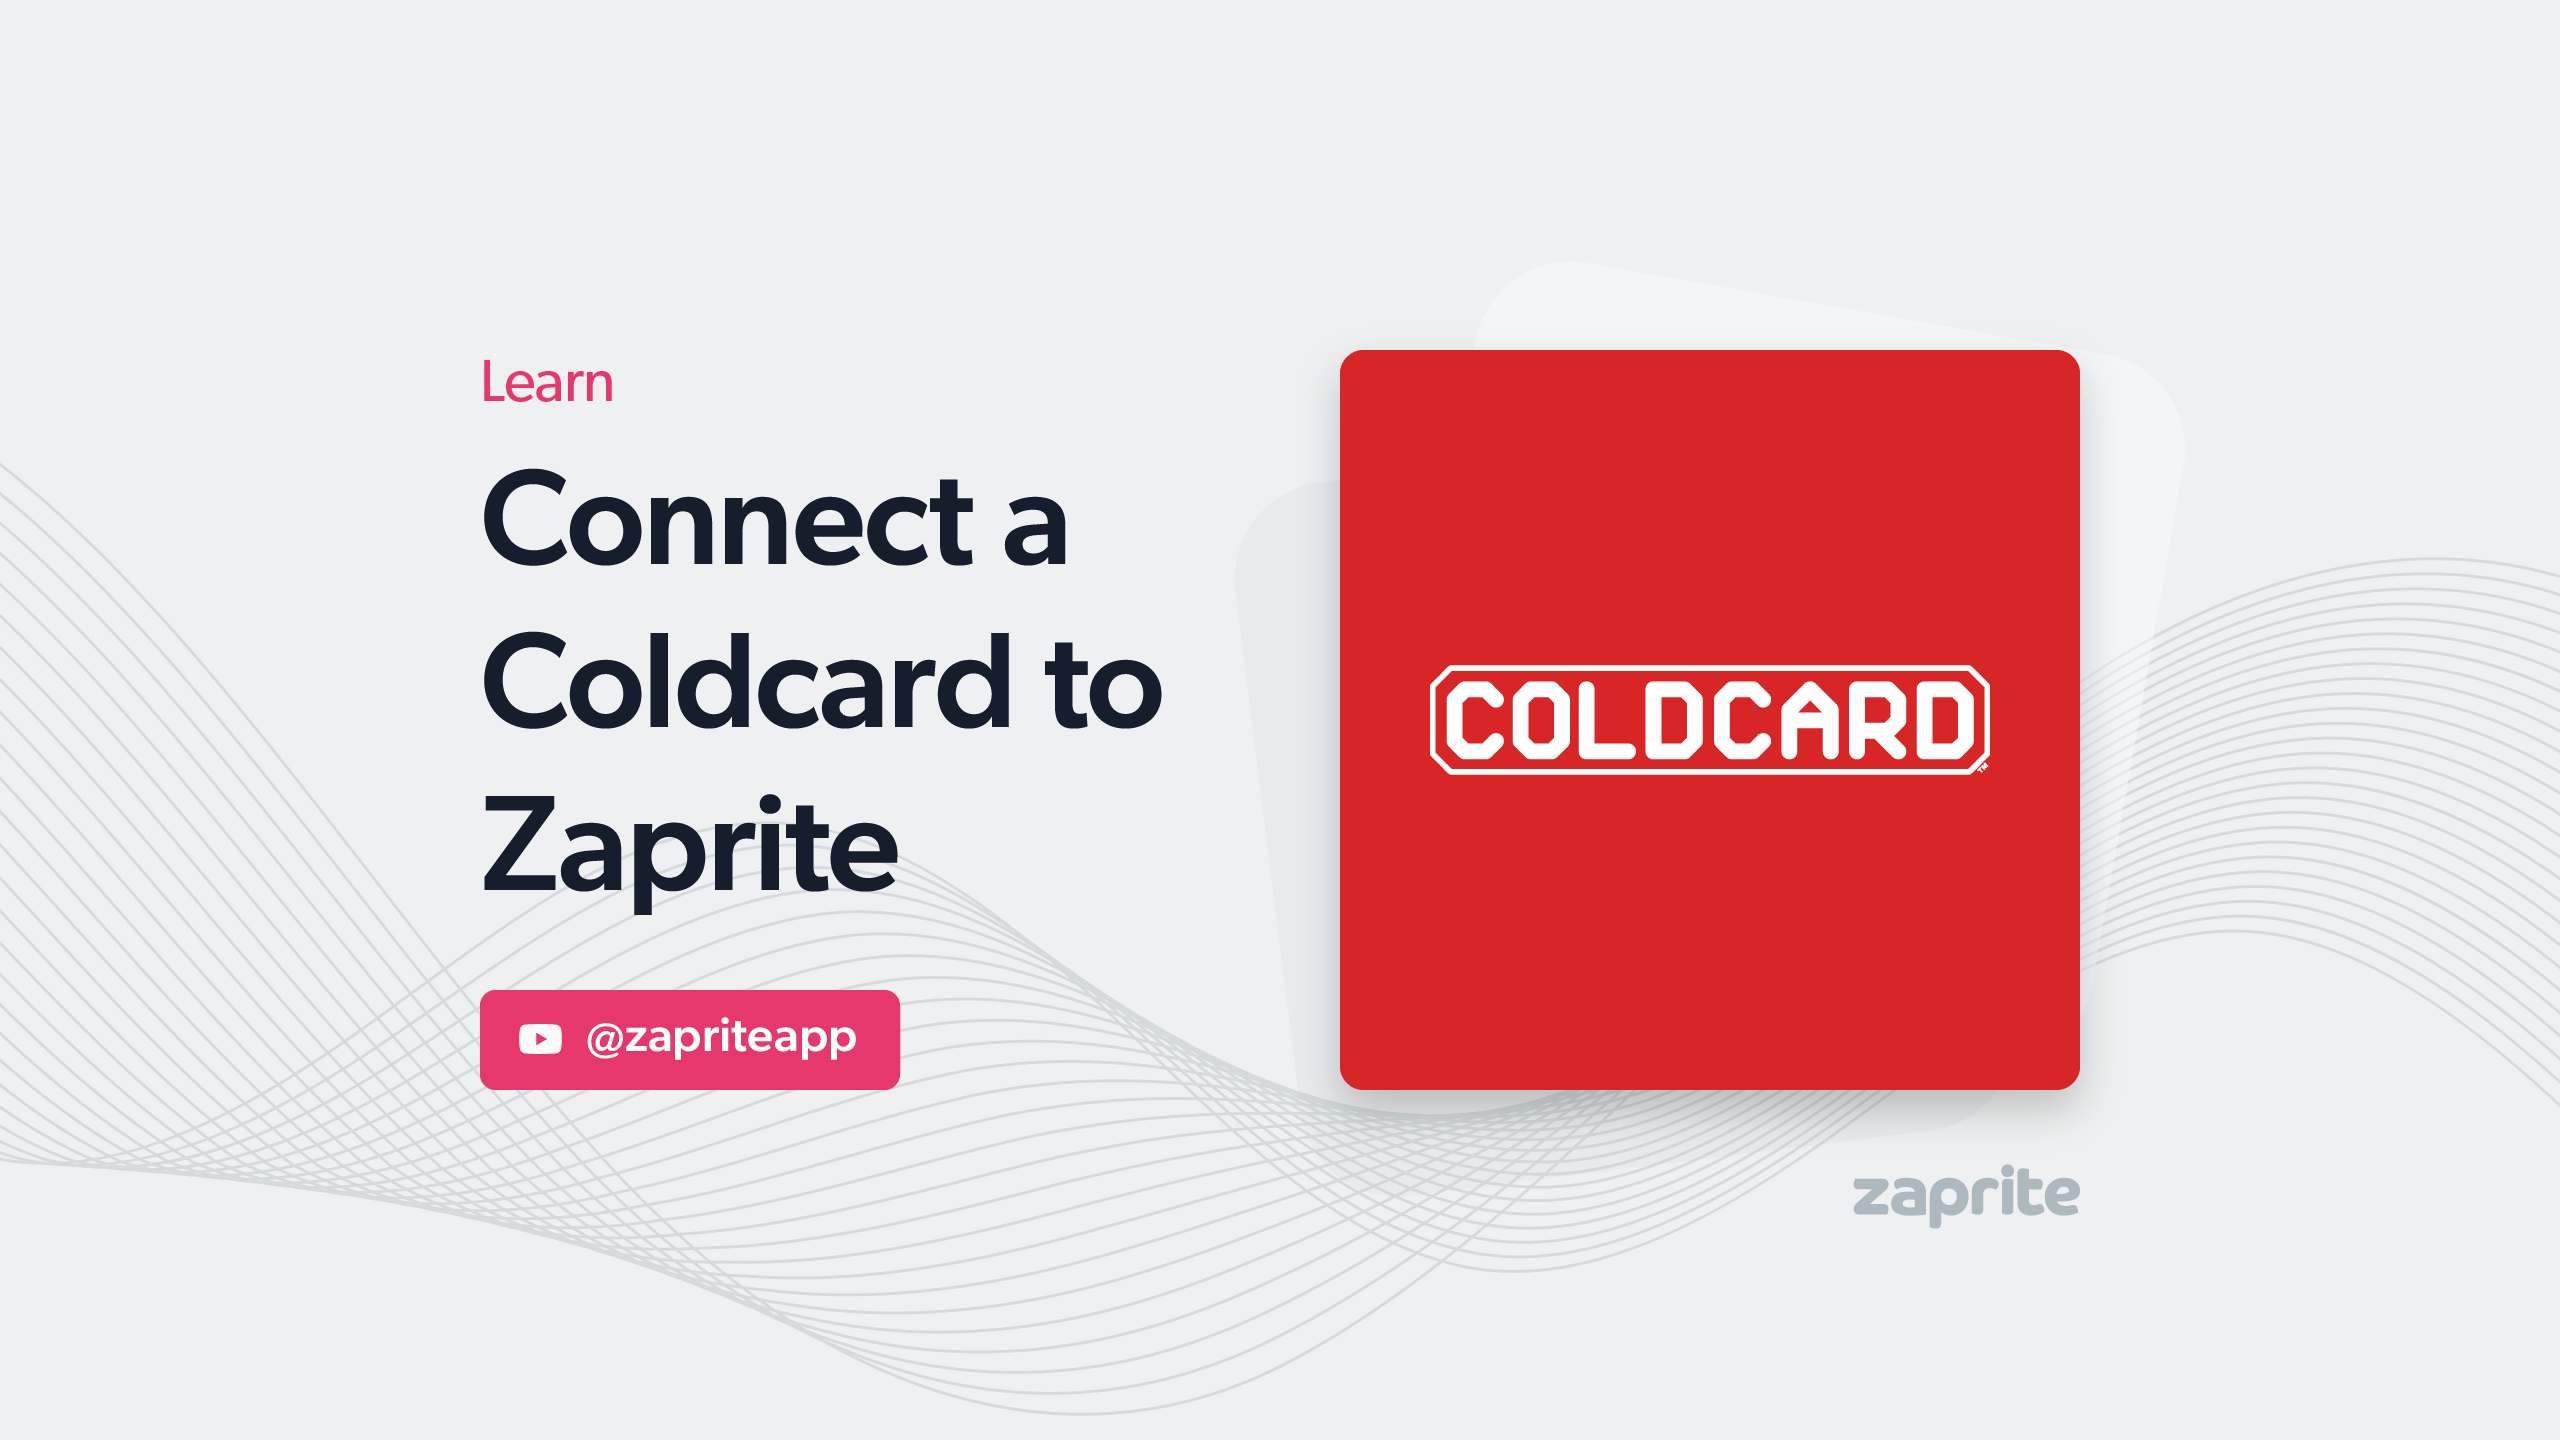 Connect a Coldcard to Zaprite